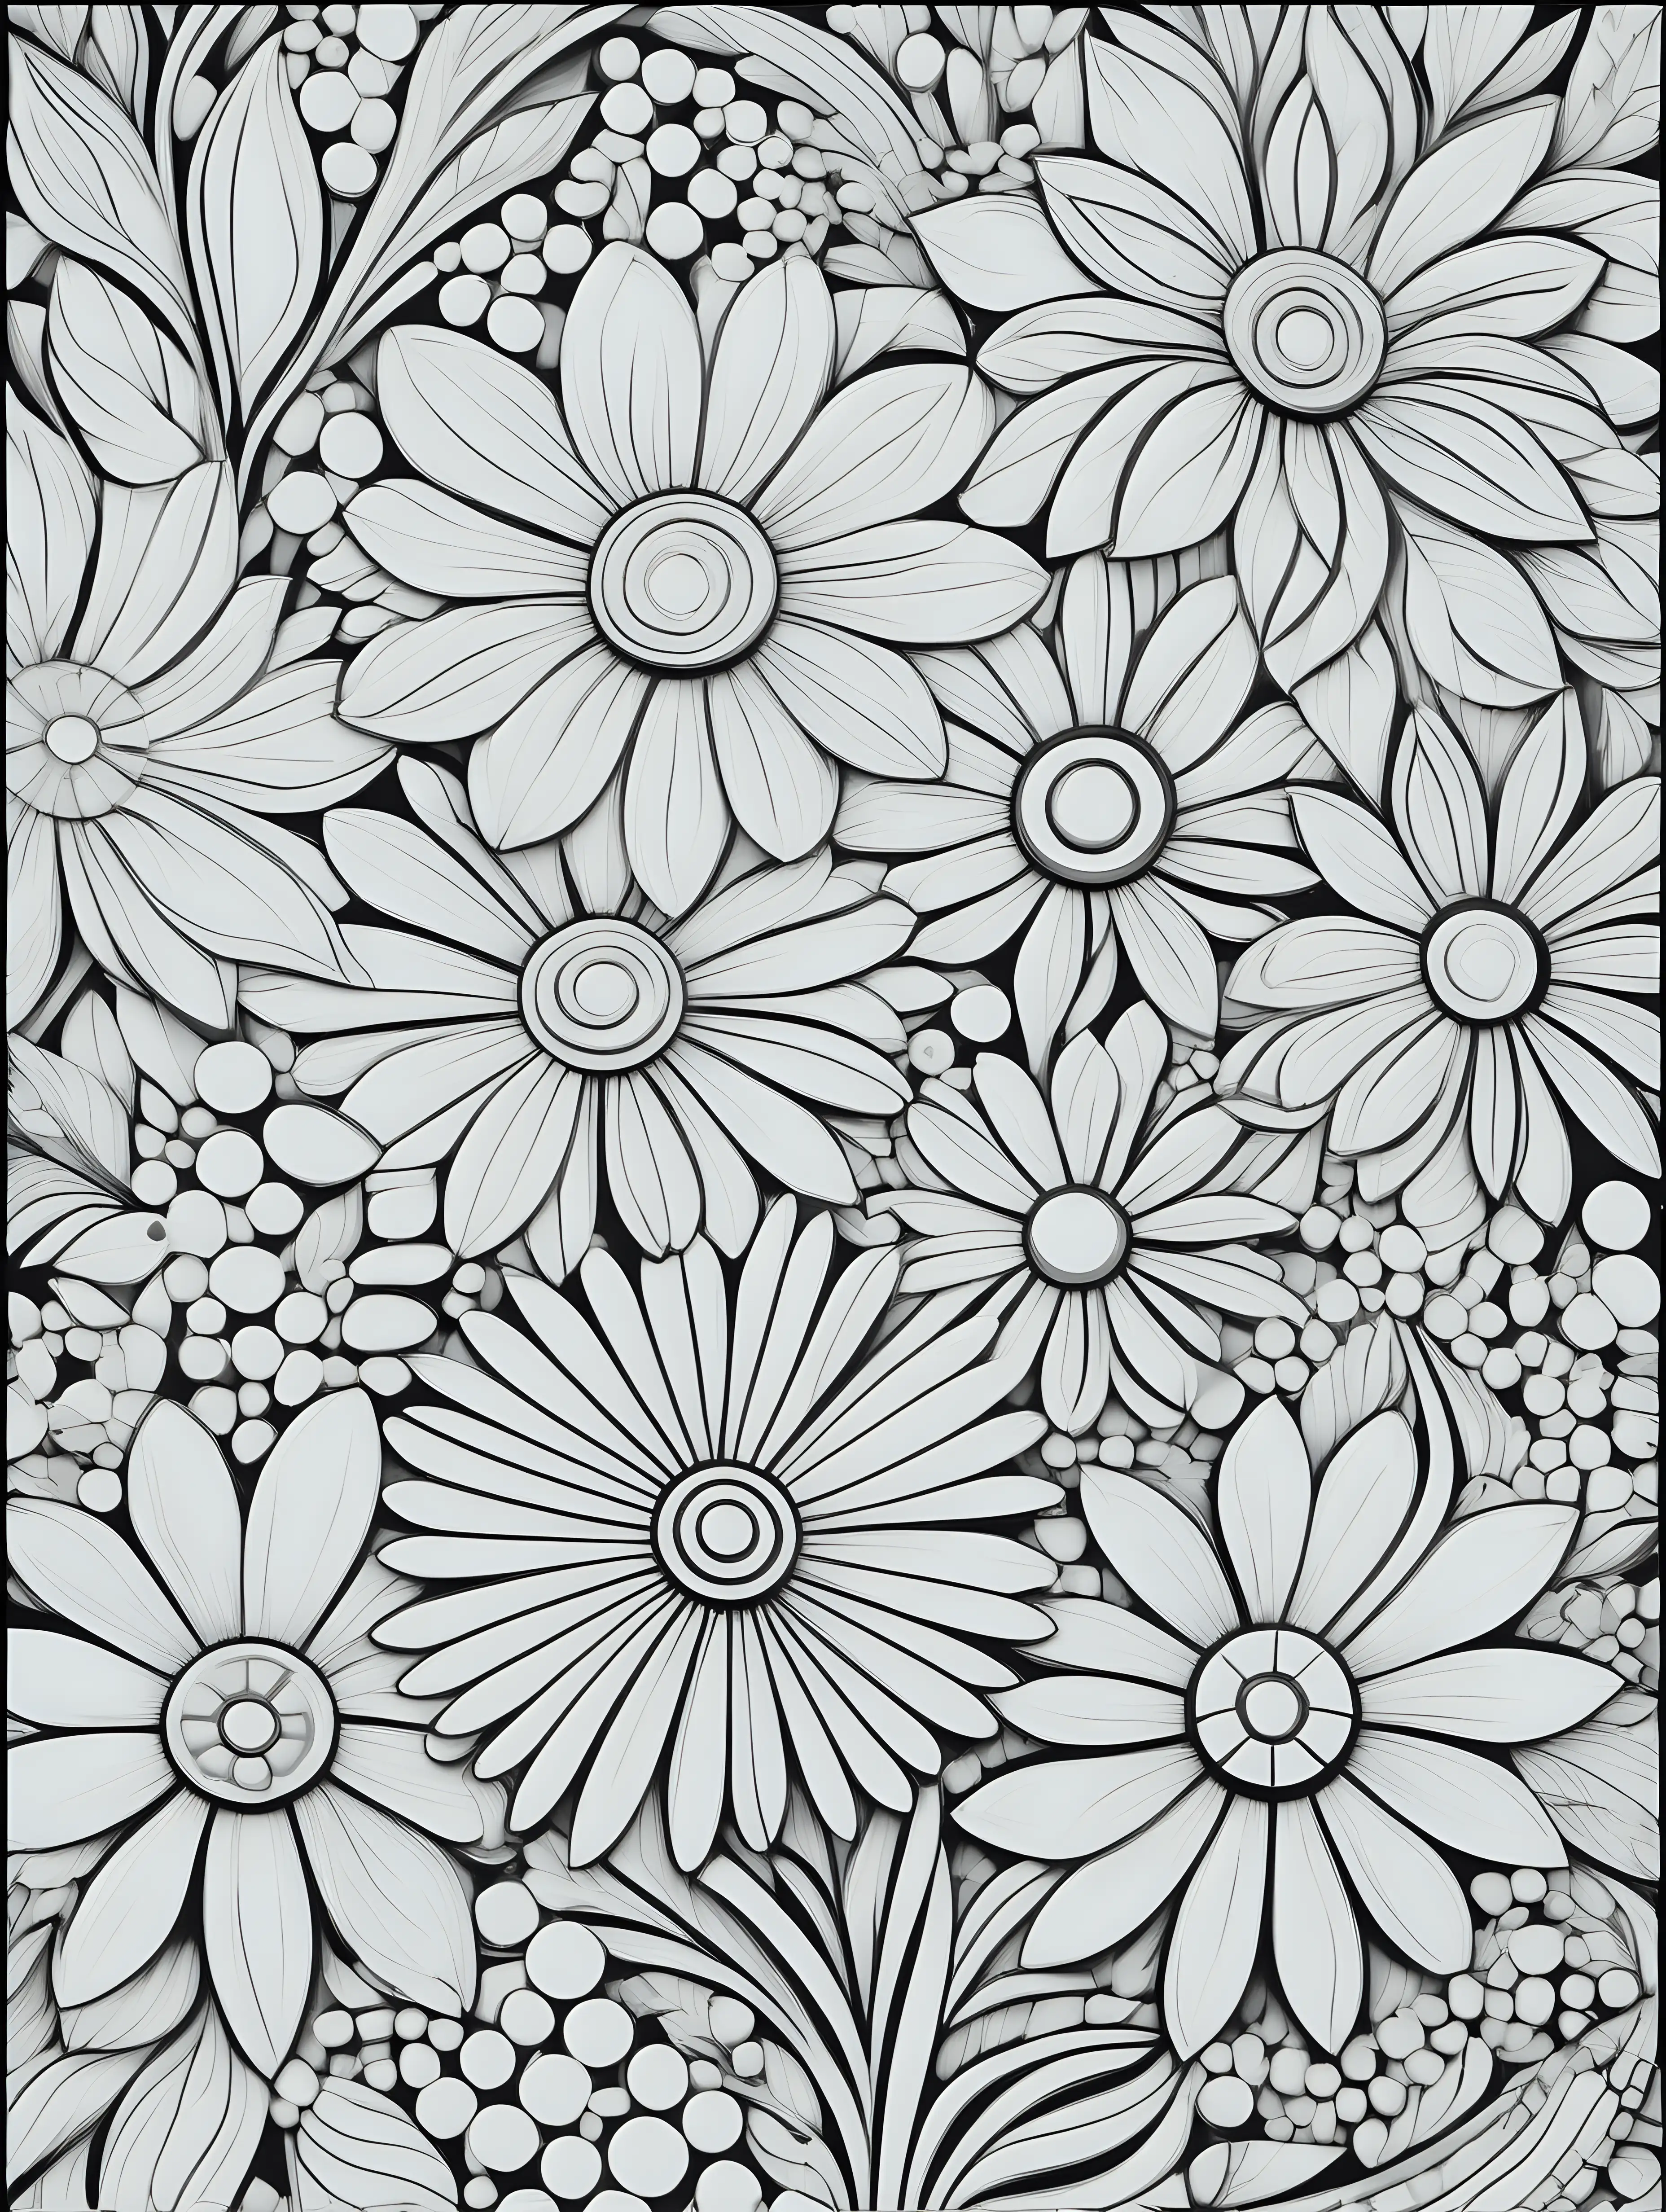 thick lines, mosaic flowers patterns, coloring page, no colors